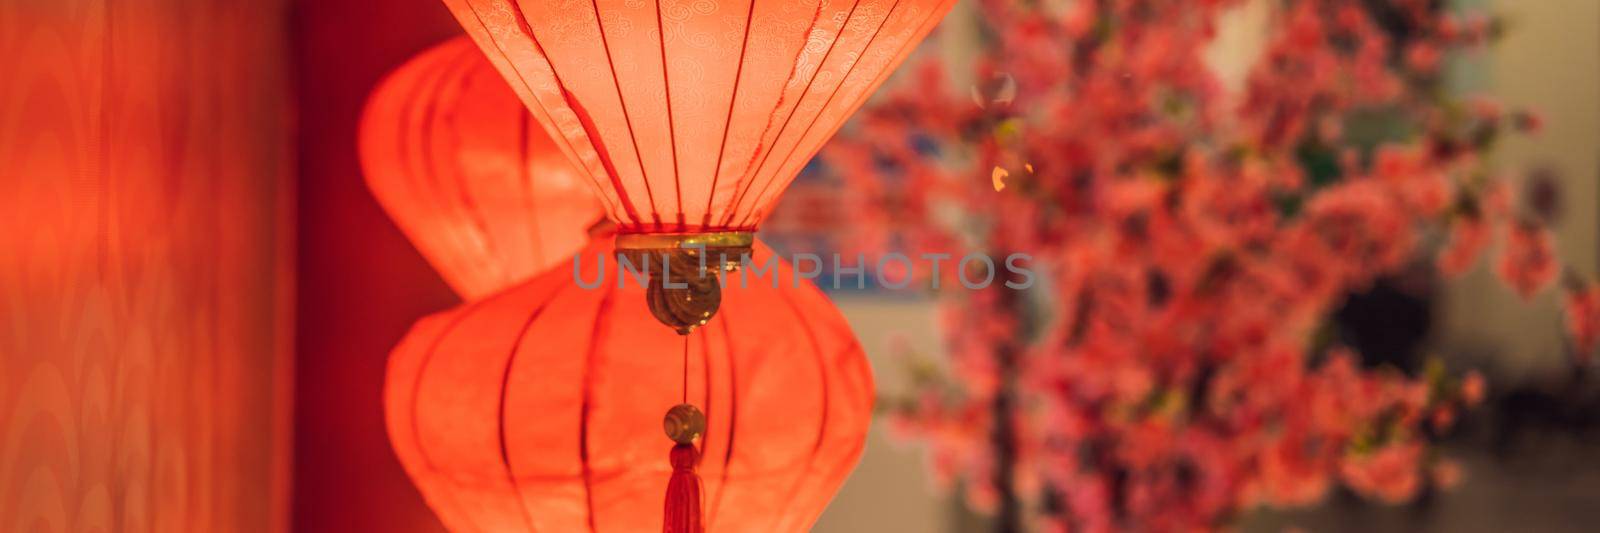 Chinese new year lanterns in chinatown or the Chinese New Year BANNER, LONG FORMAT